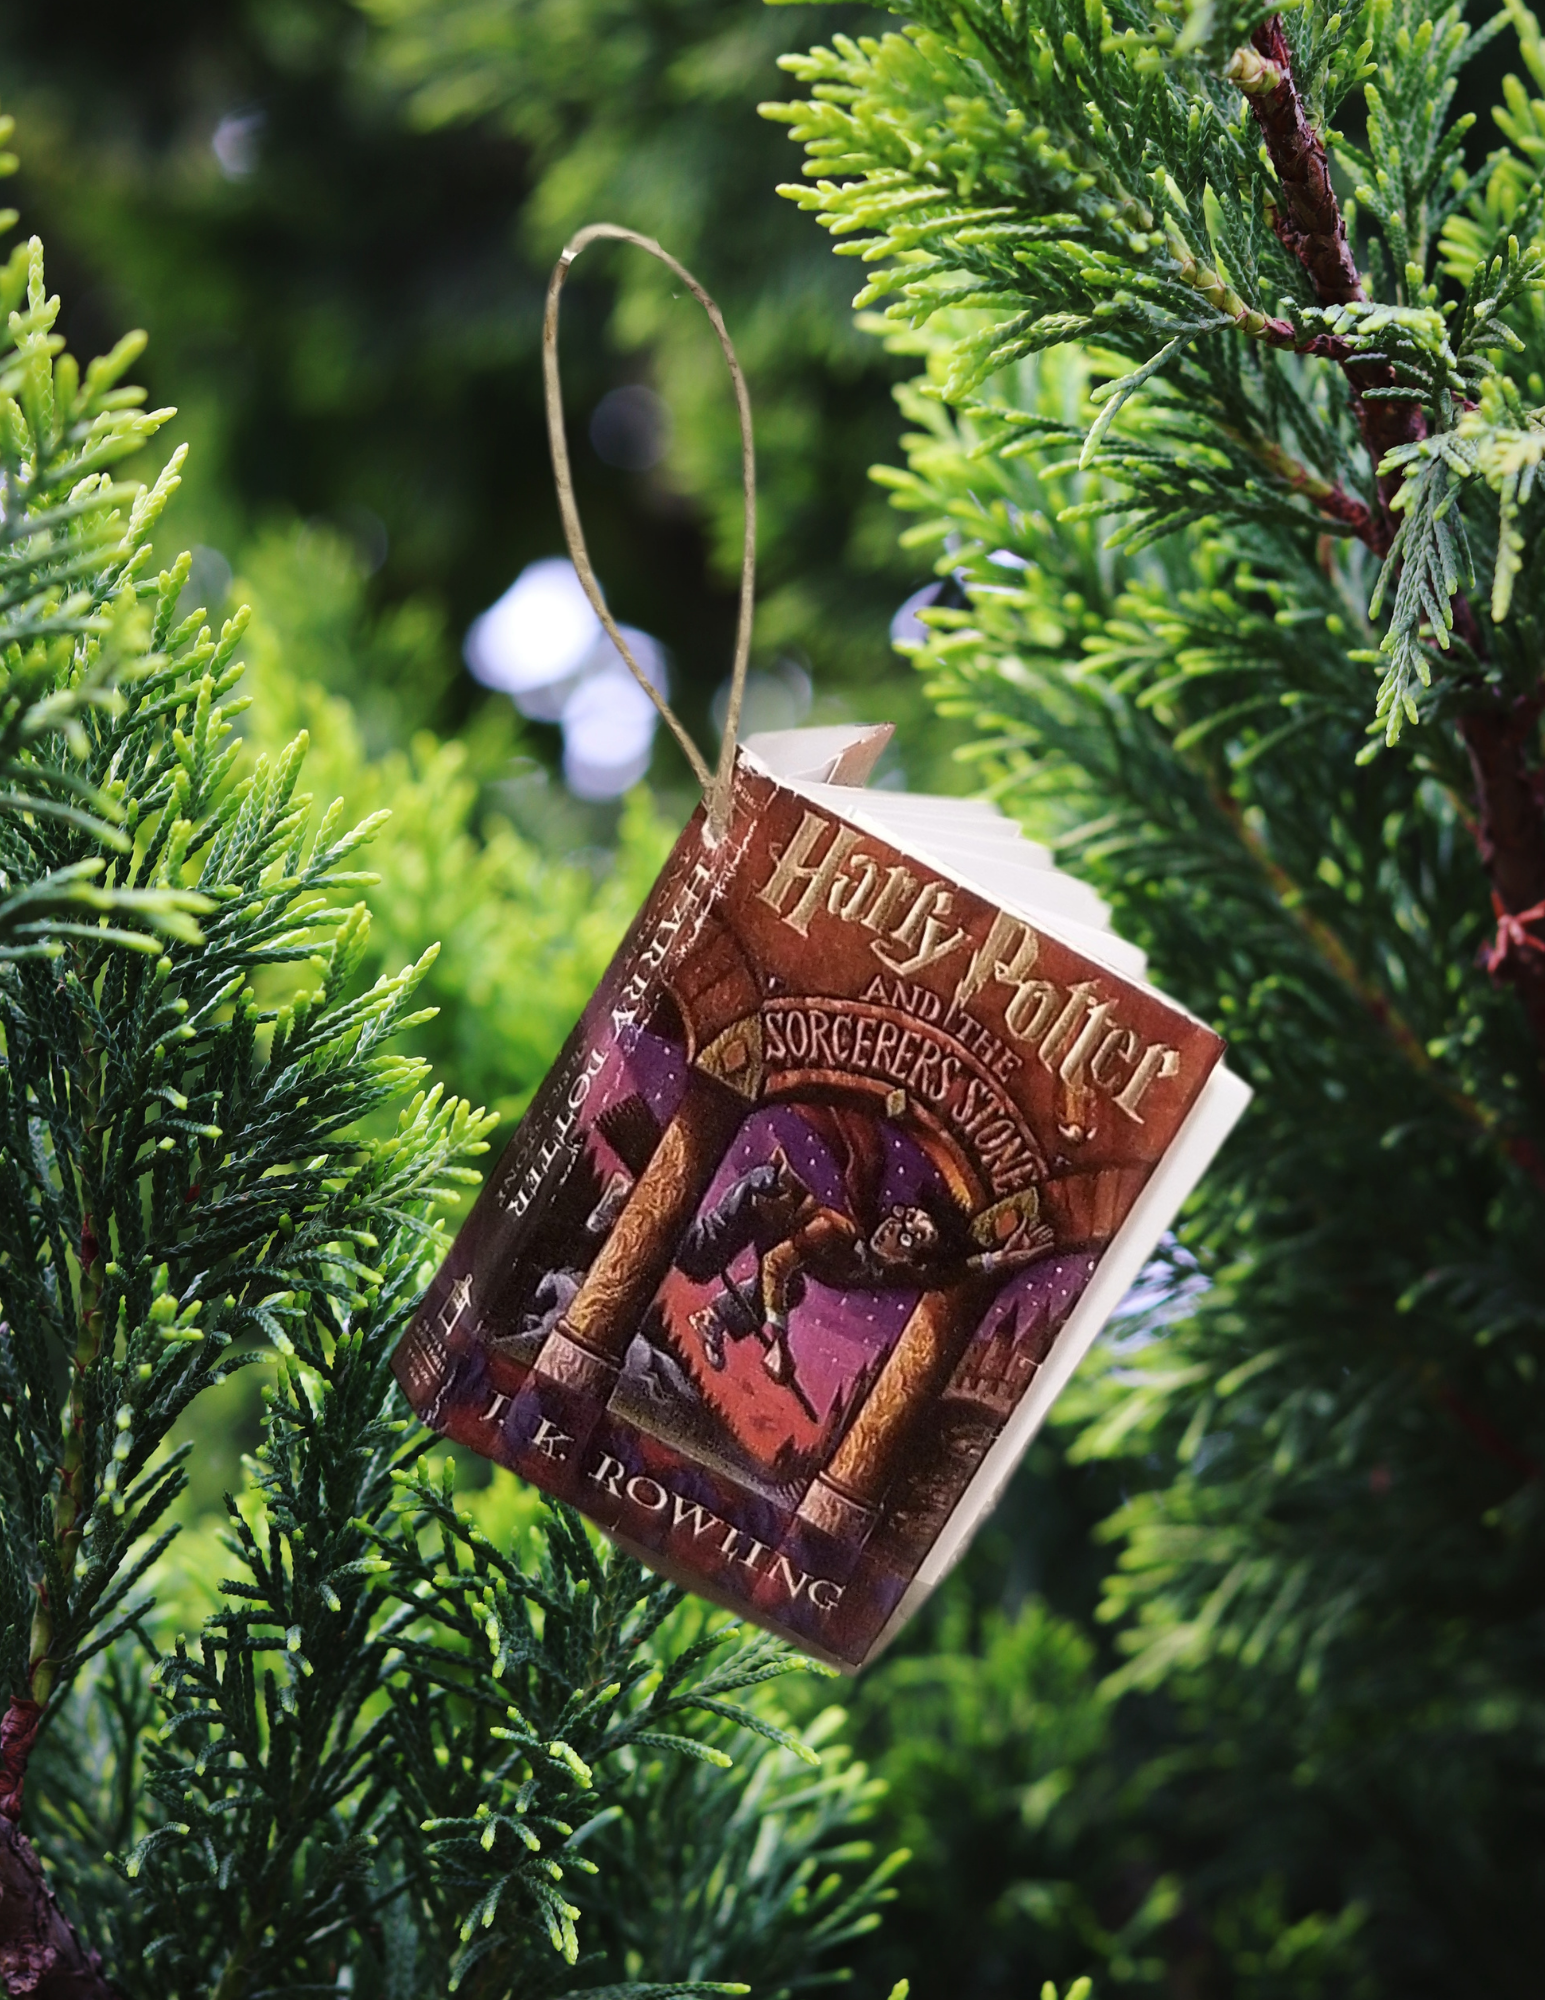 A miniature version of the book "Harry Potter and the Sorcerer's Stone" as an ornament in front of green evergreen foliage